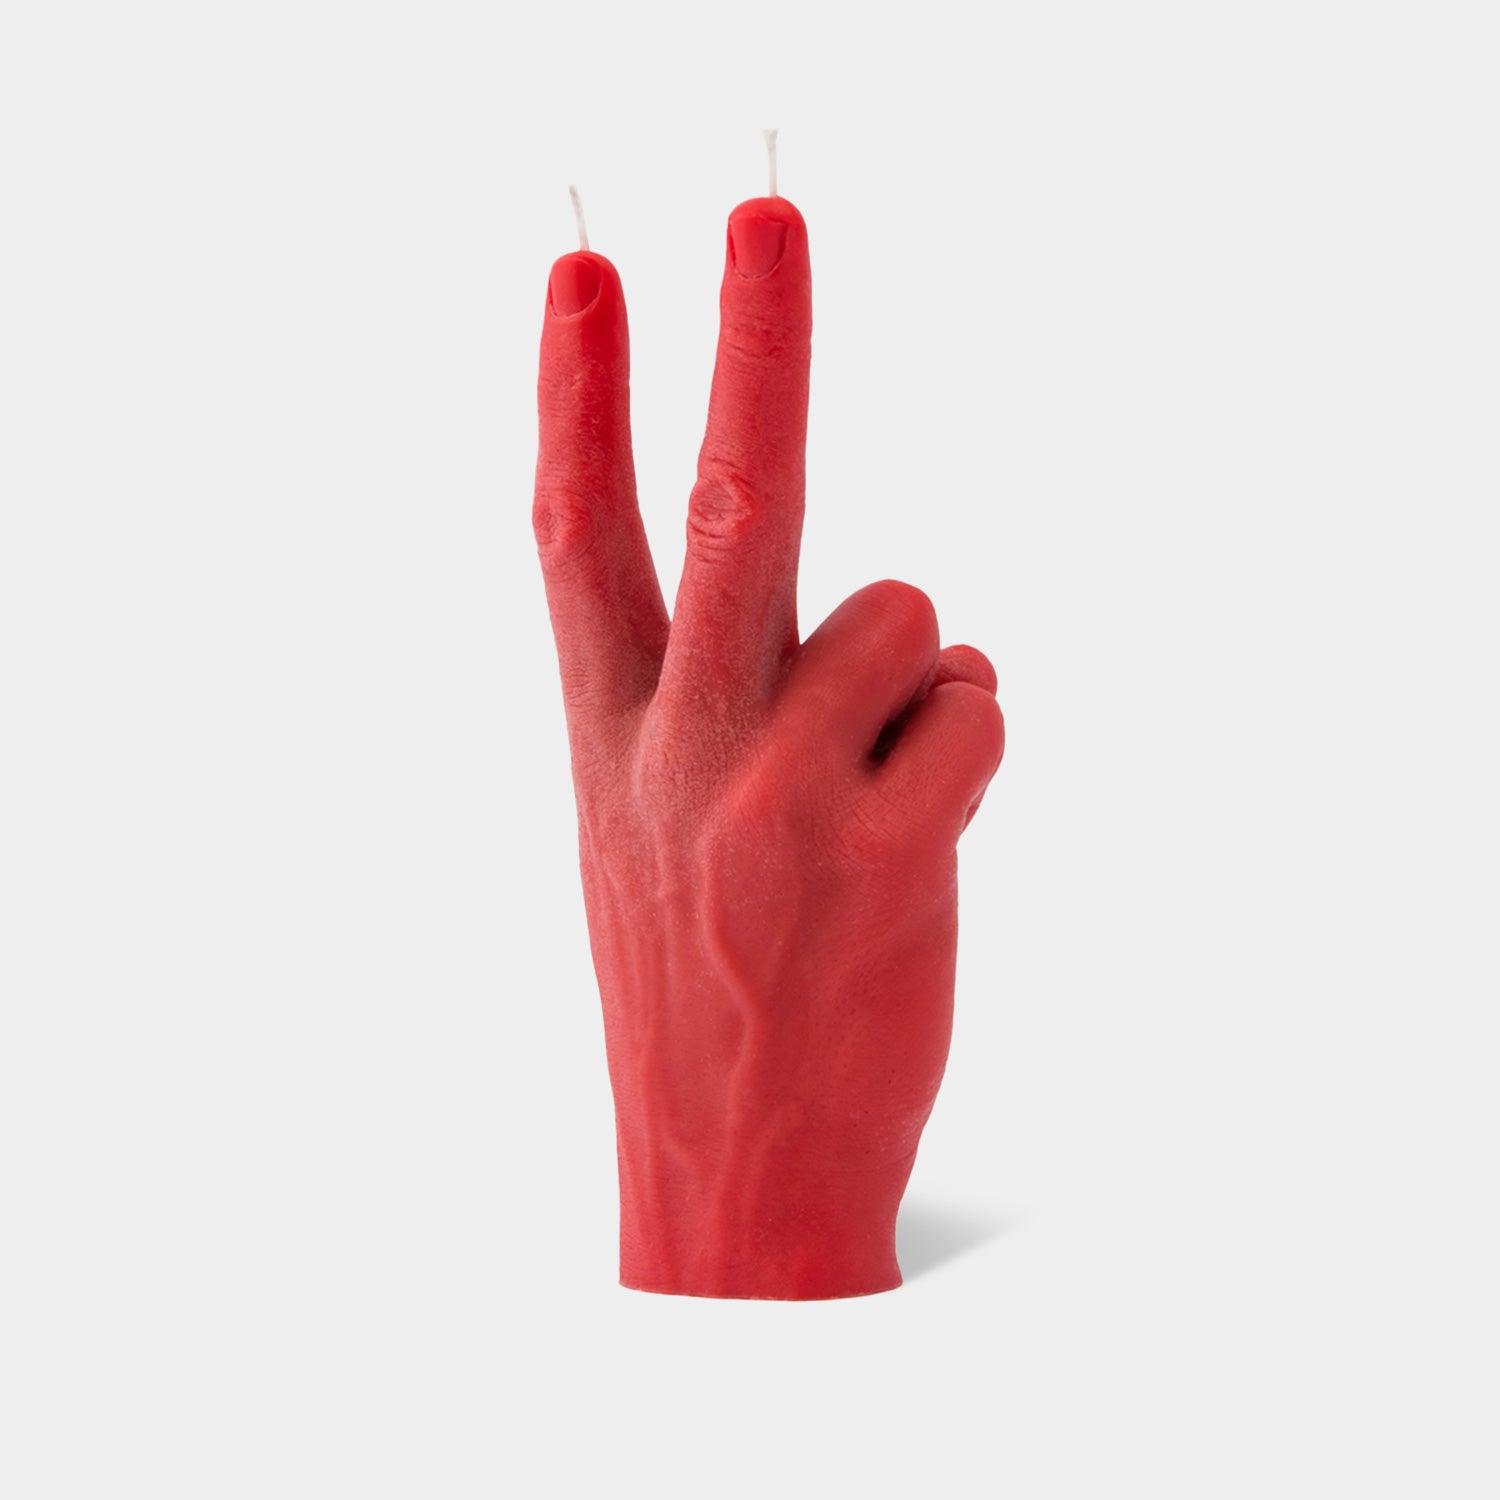 CandleHand "Peace" Candle - Red